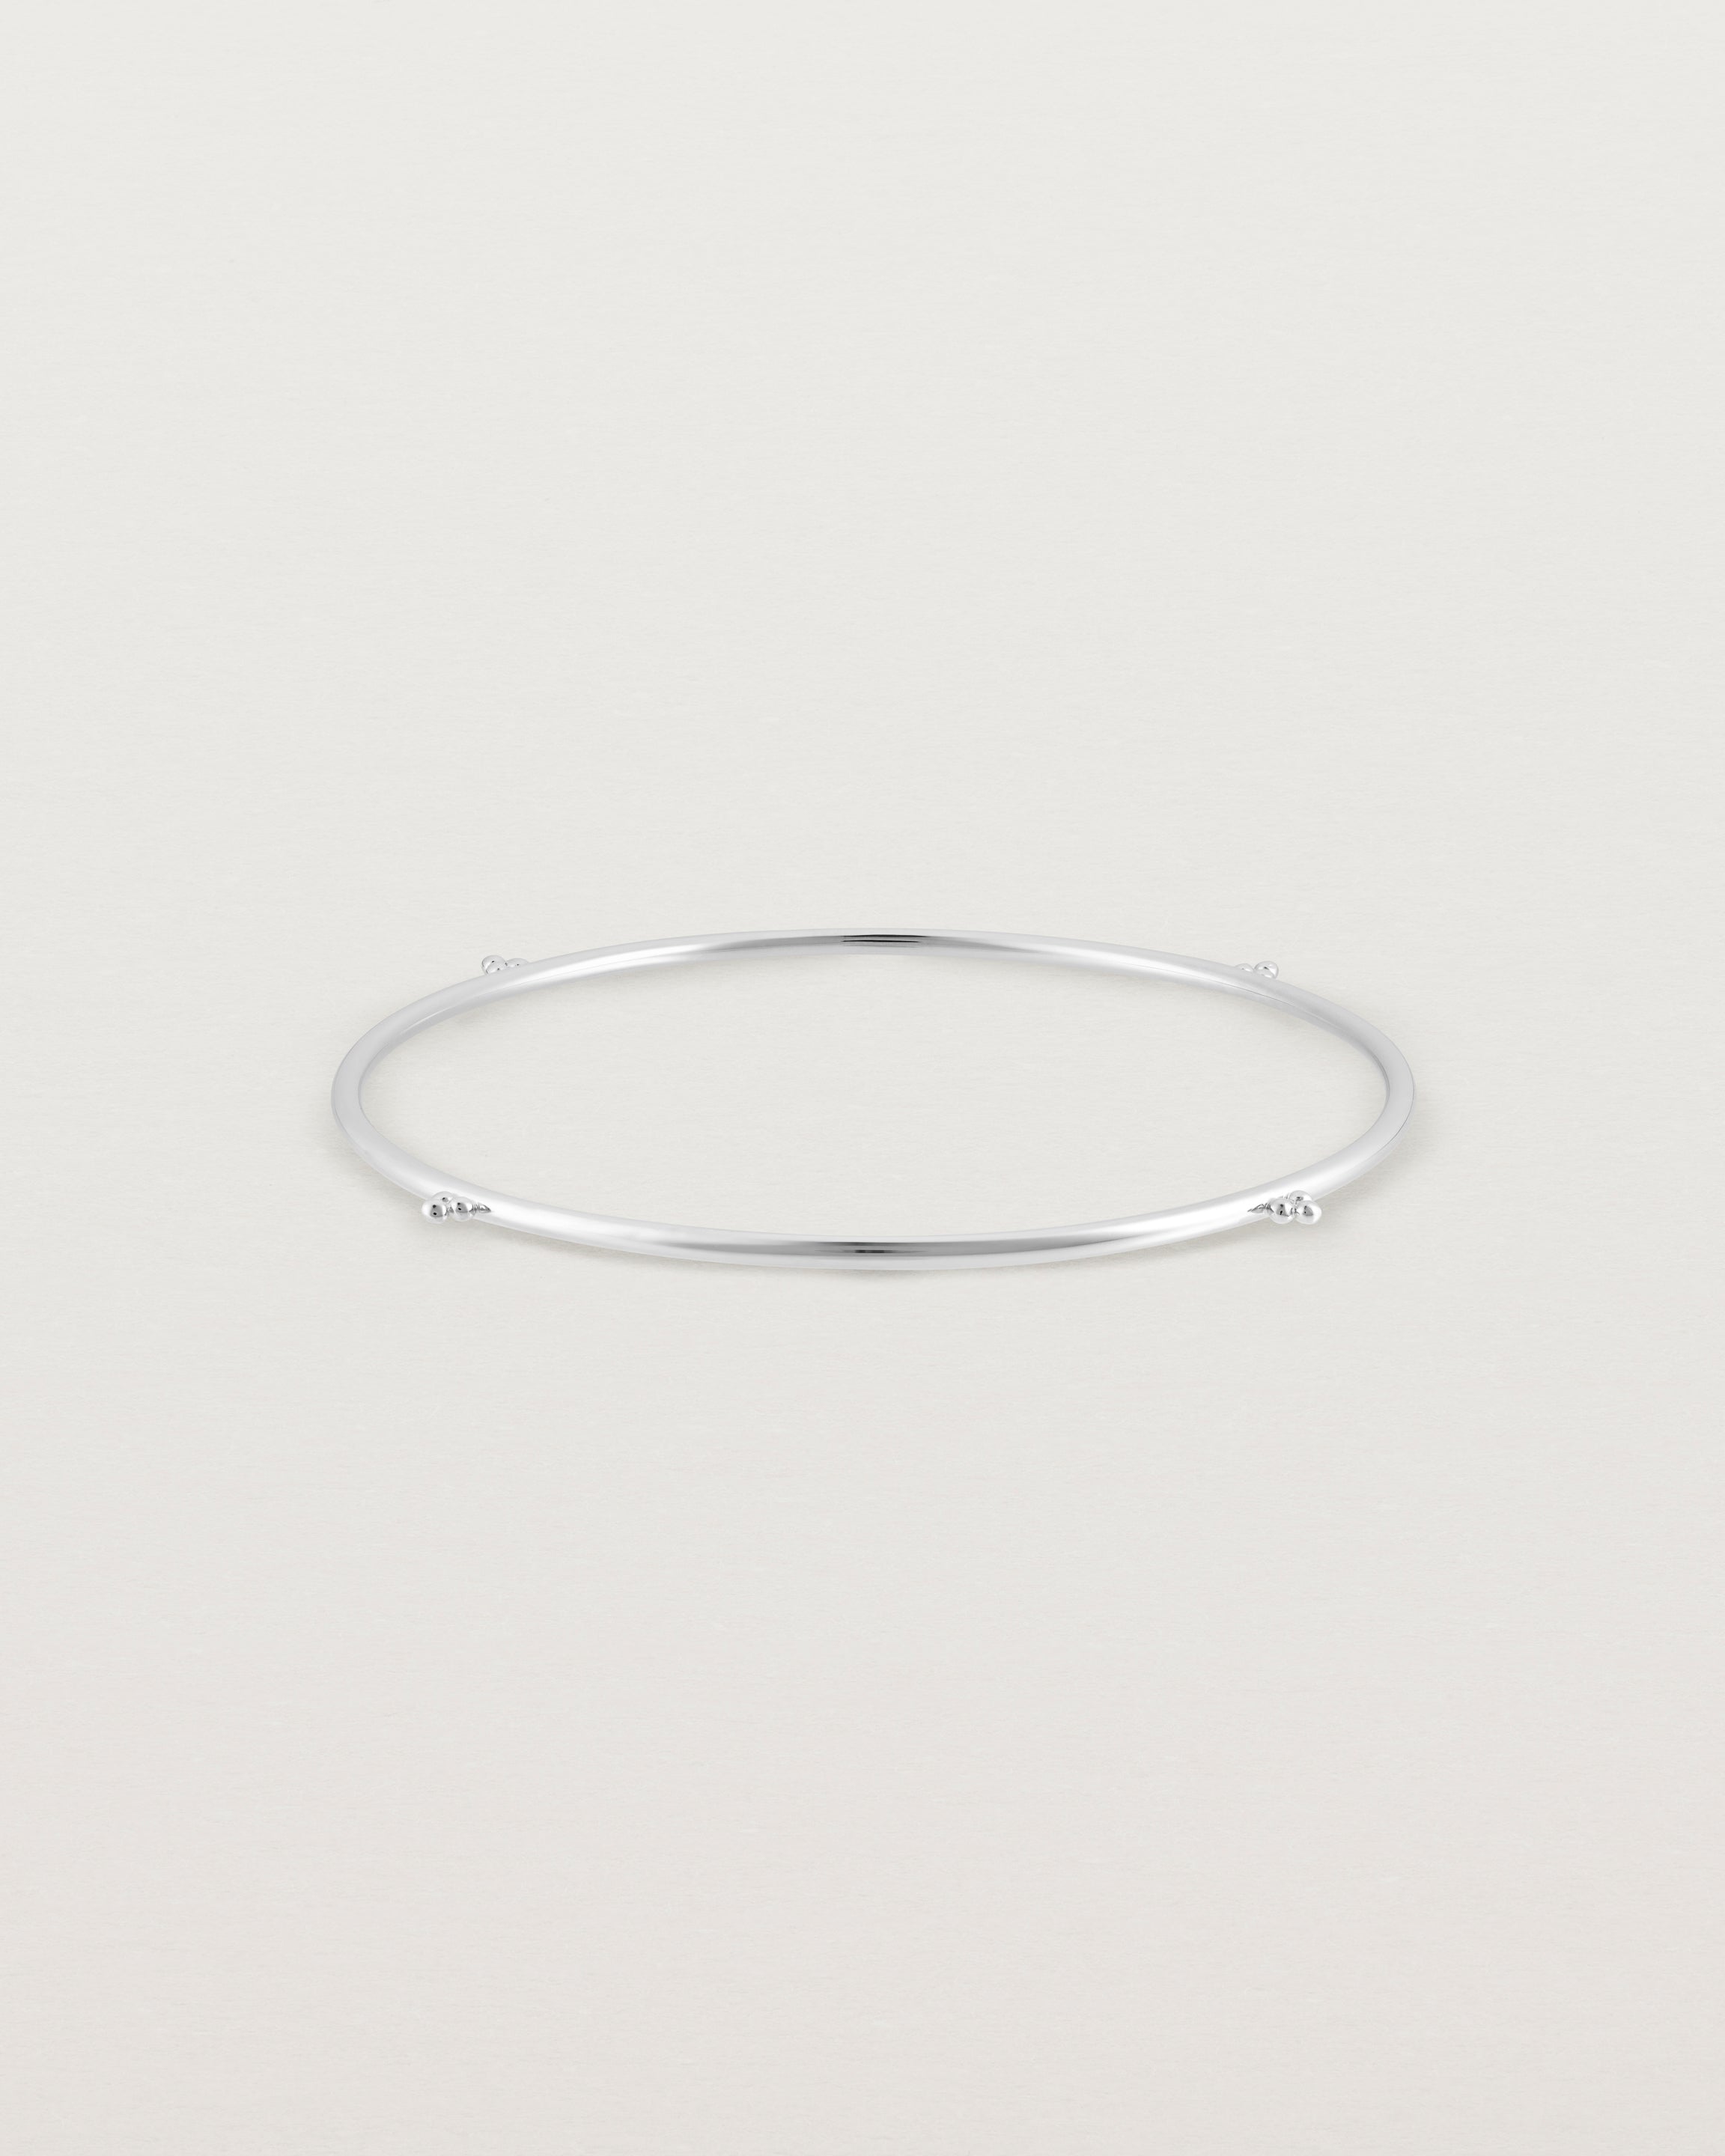 Front view of the Alya Bangle in Sterling Silver.